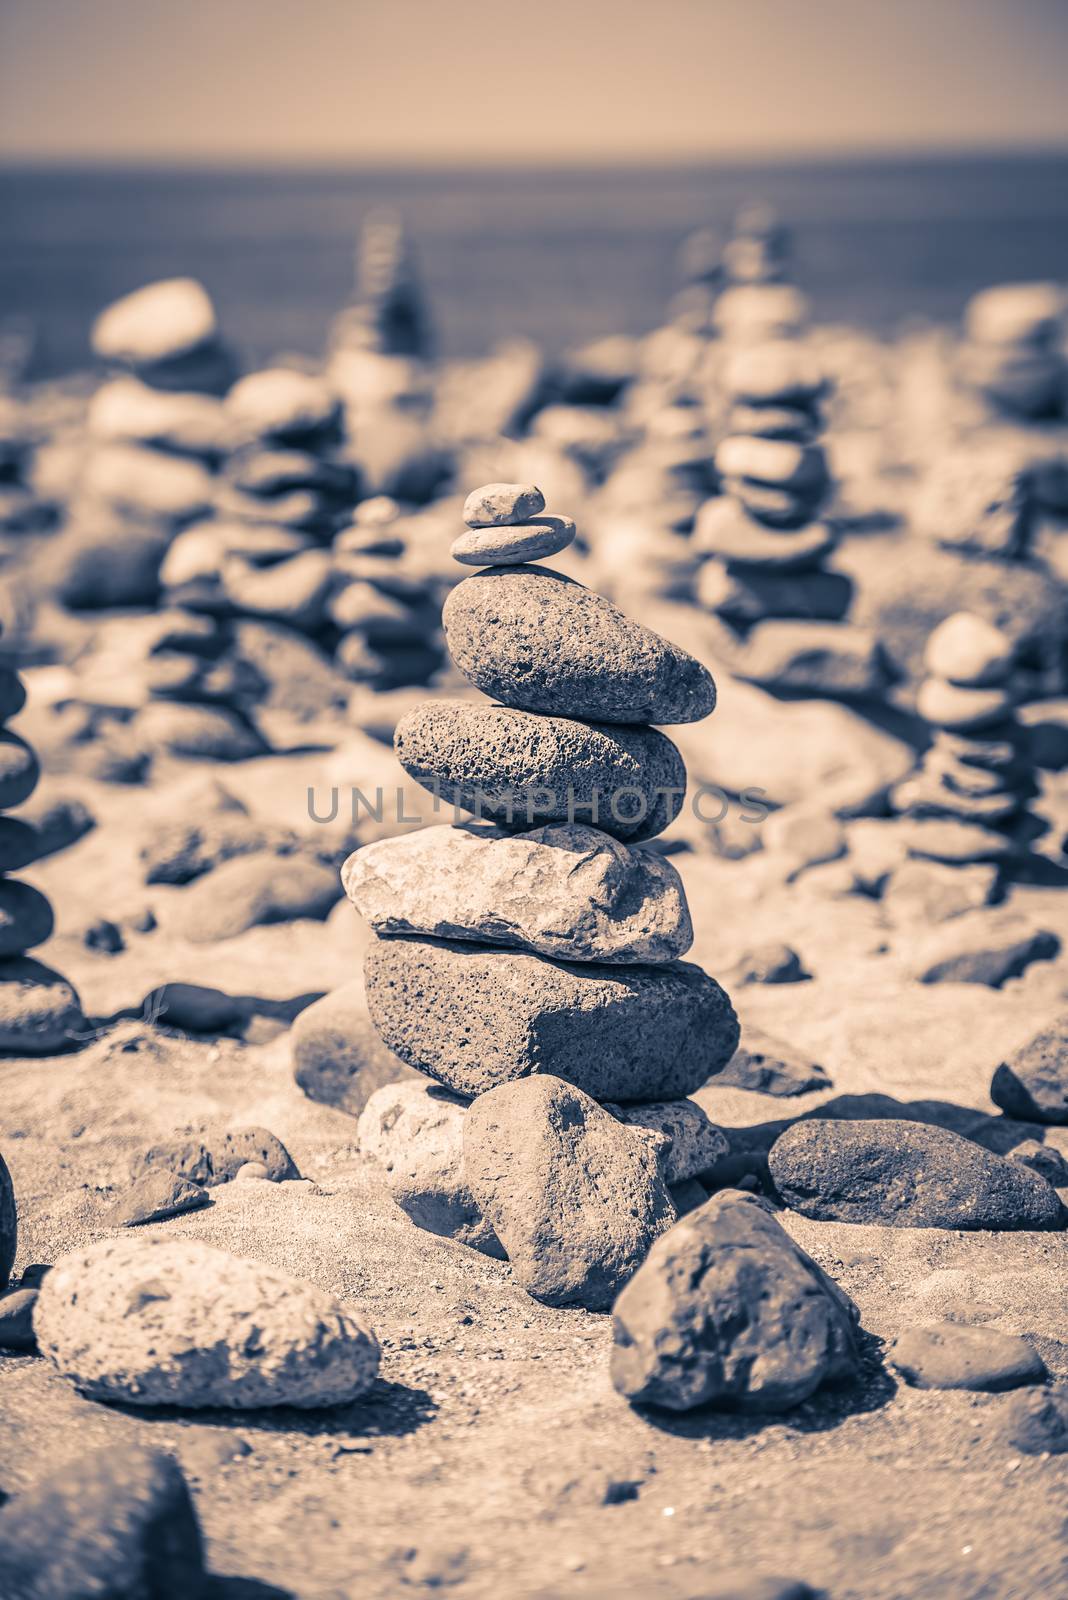 Pyramid of stones in the sand at the beach. Stylized picture.